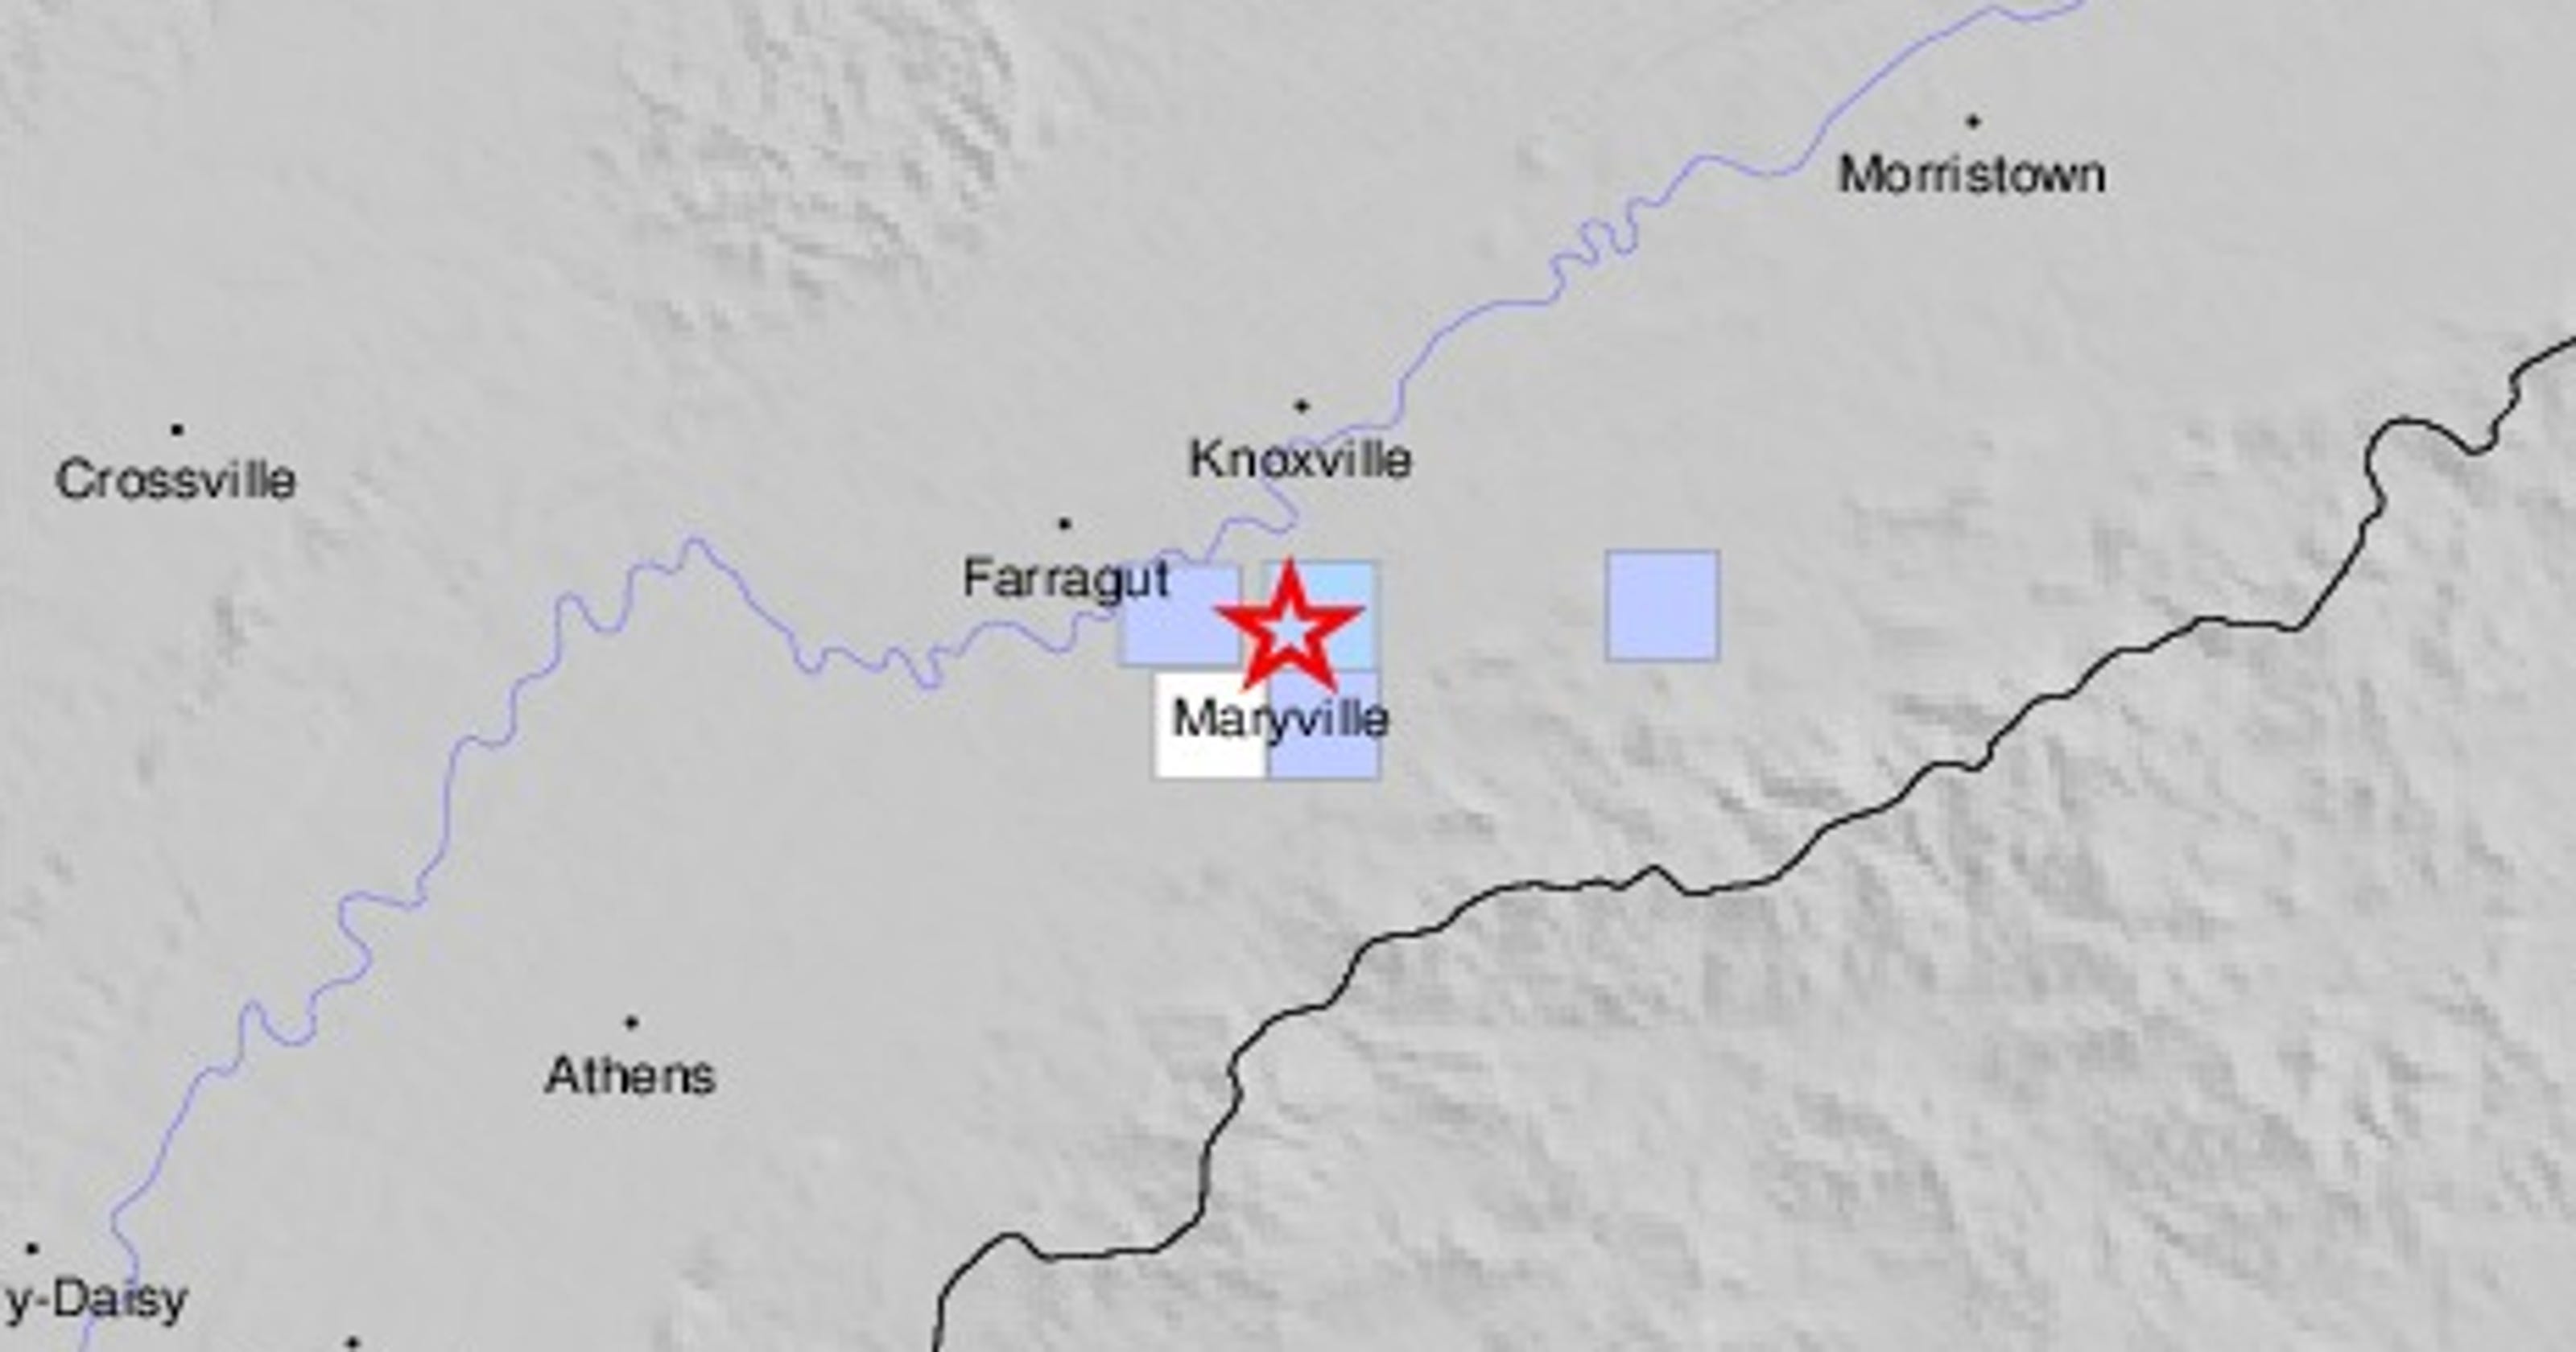 East Tennessee earthquake hits 12 miles from Knoxville